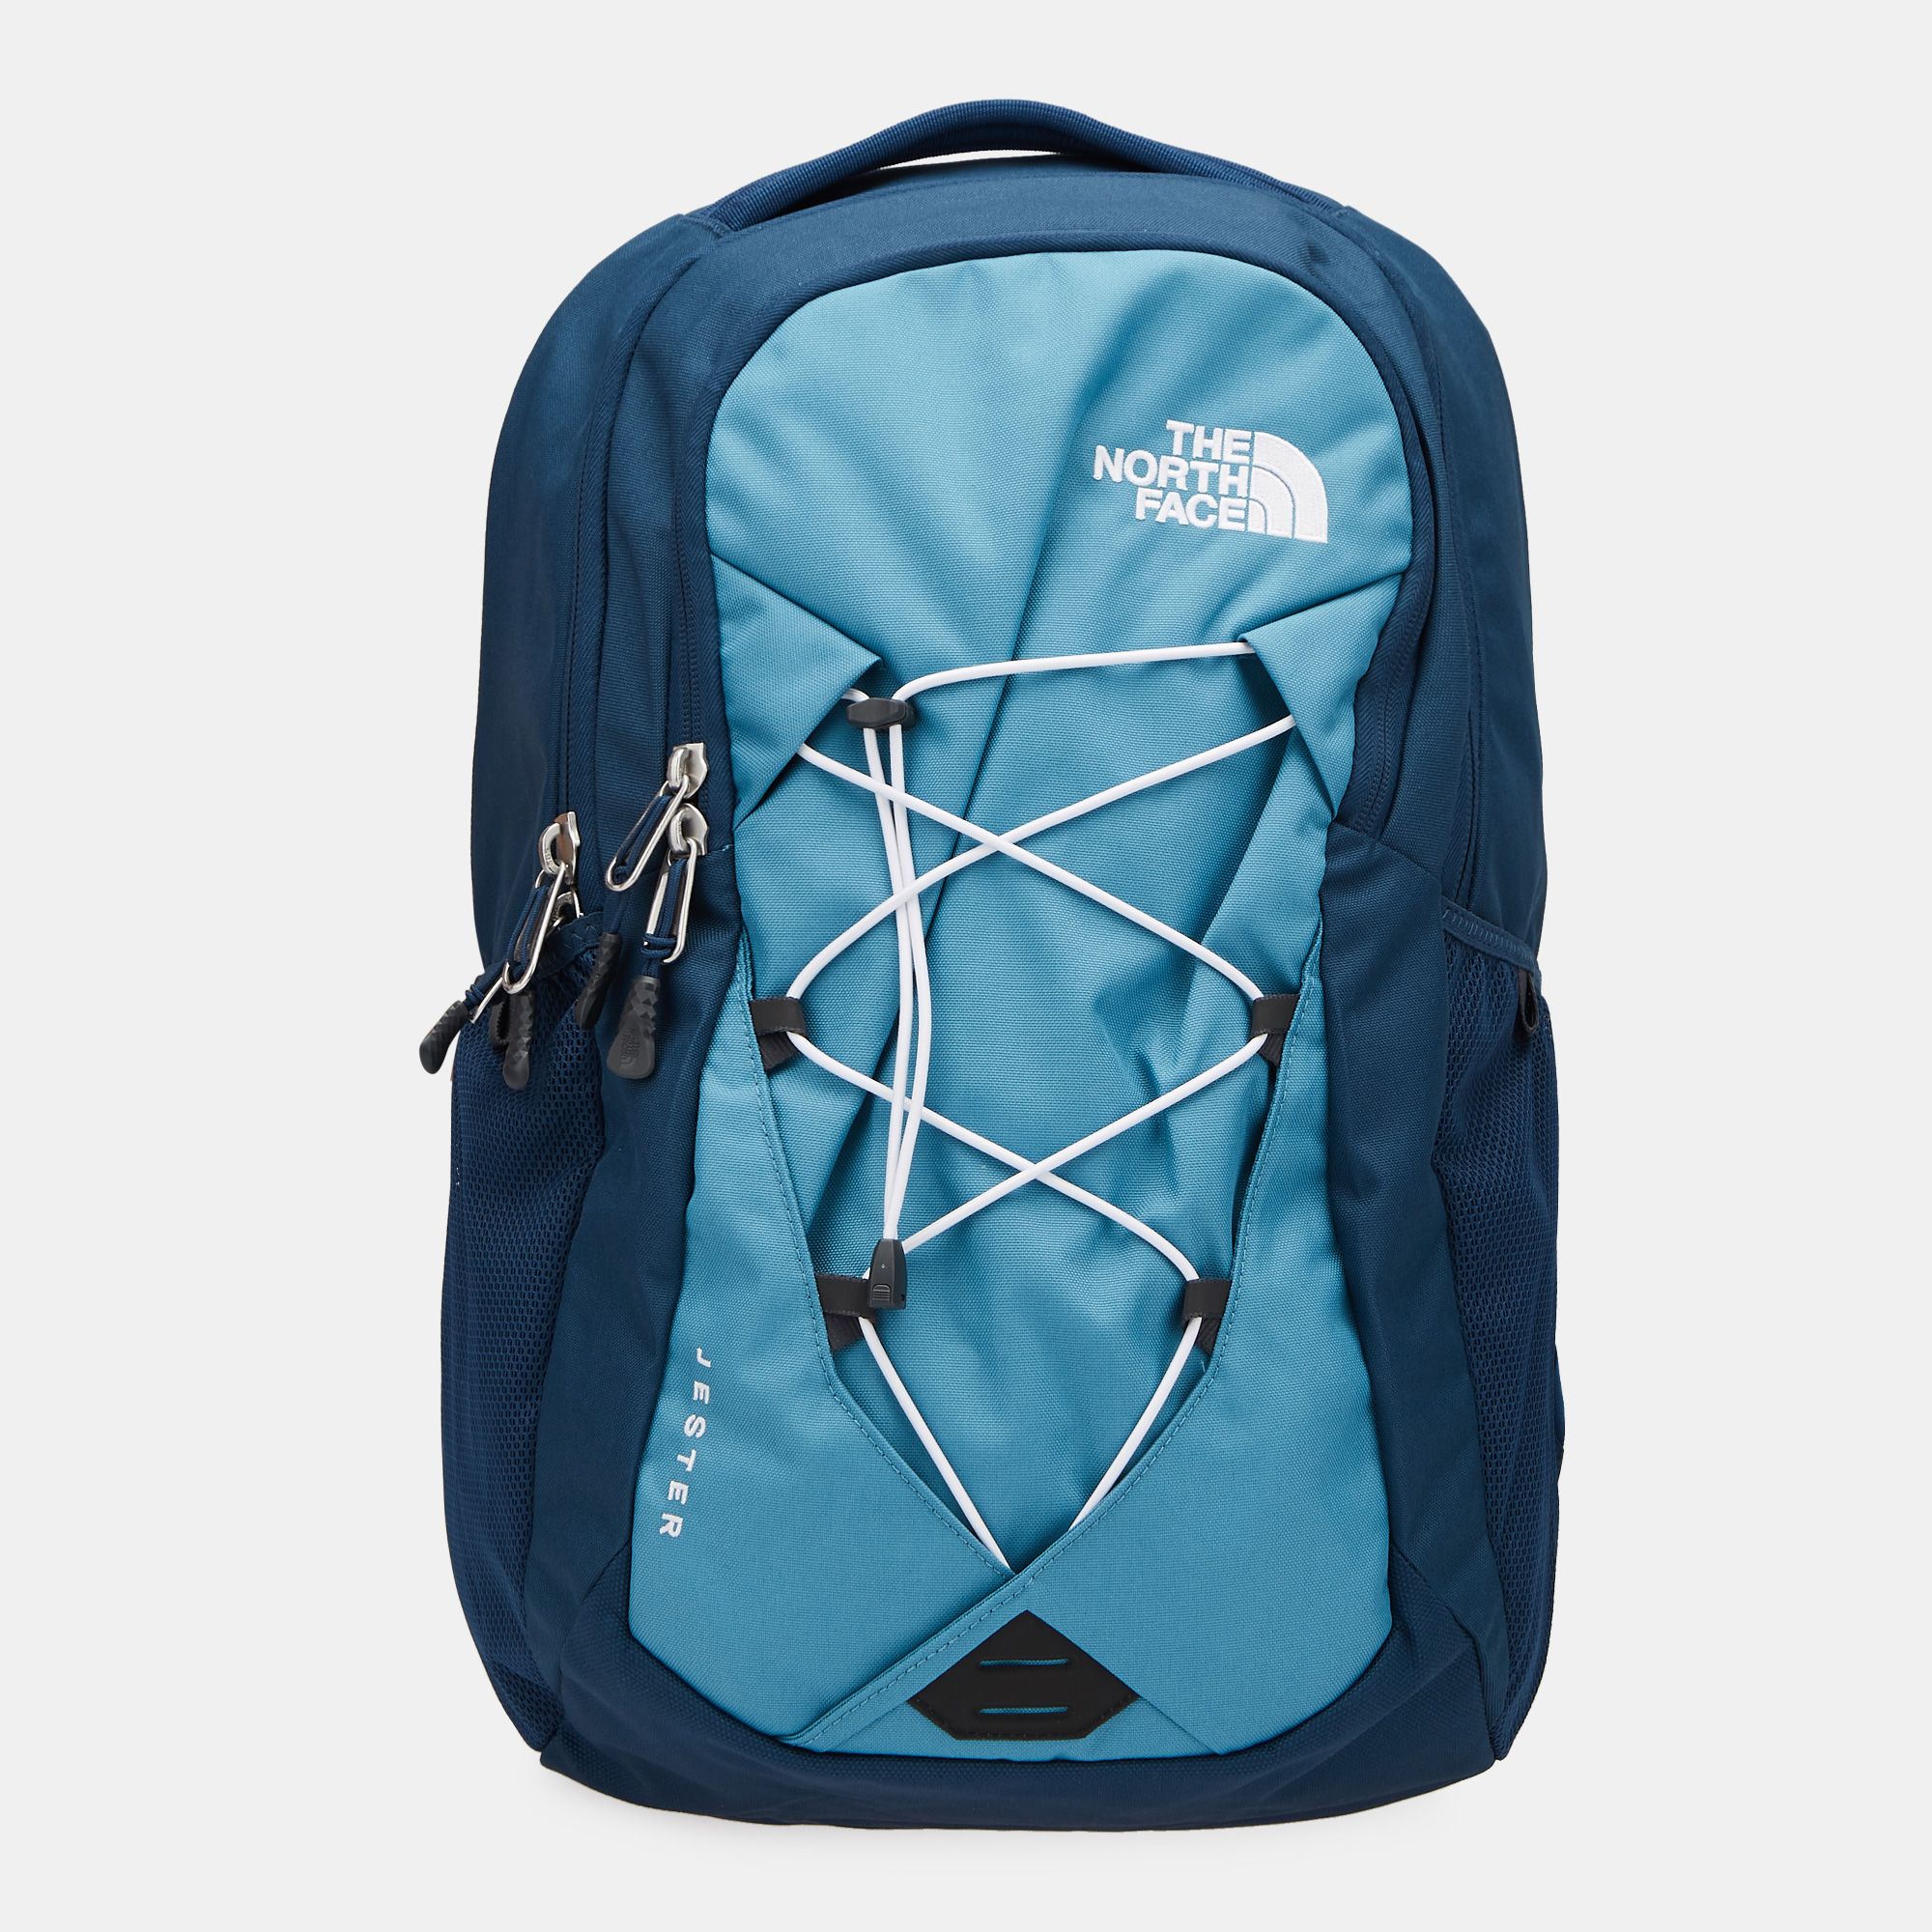 jester pack north face